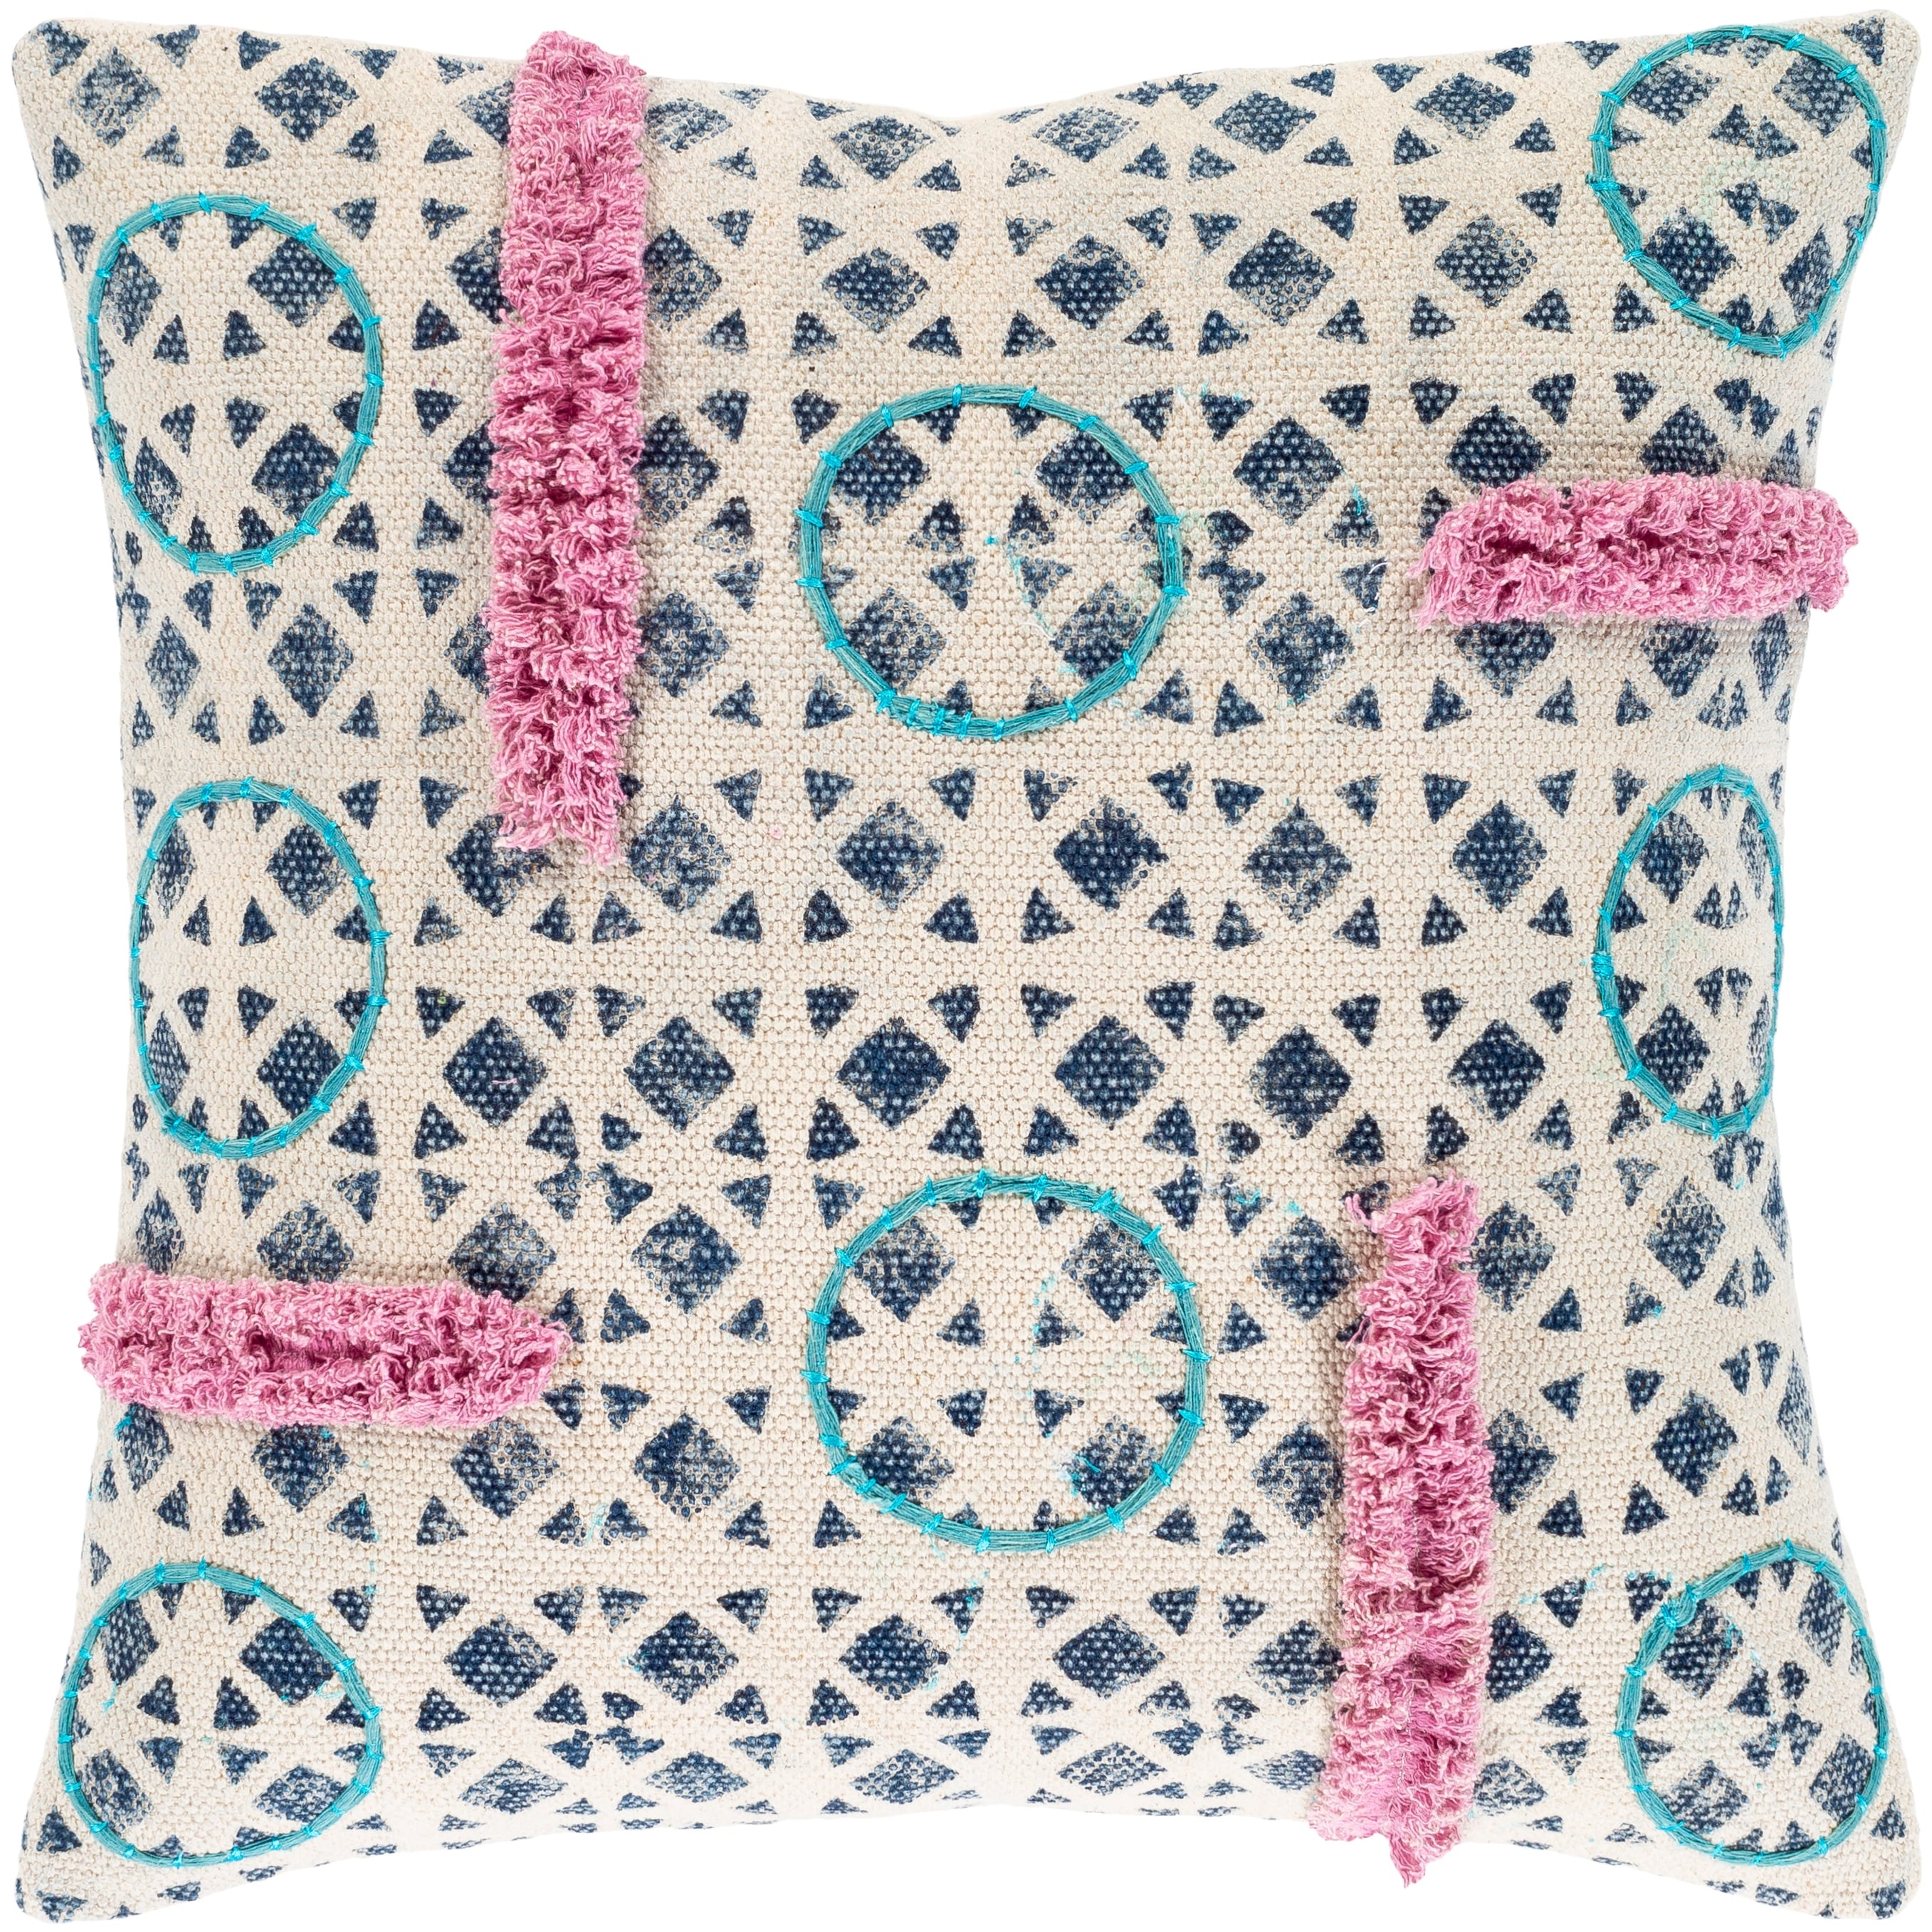 https://ak1.ostkcdn.com/images/products/is/images/direct/5bab5399ae38c129b6618ed3e723efcb9d6567a8/Paloma-Textured-Bohemian-Pink-%26-Teal-Throw-Pillow.jpg